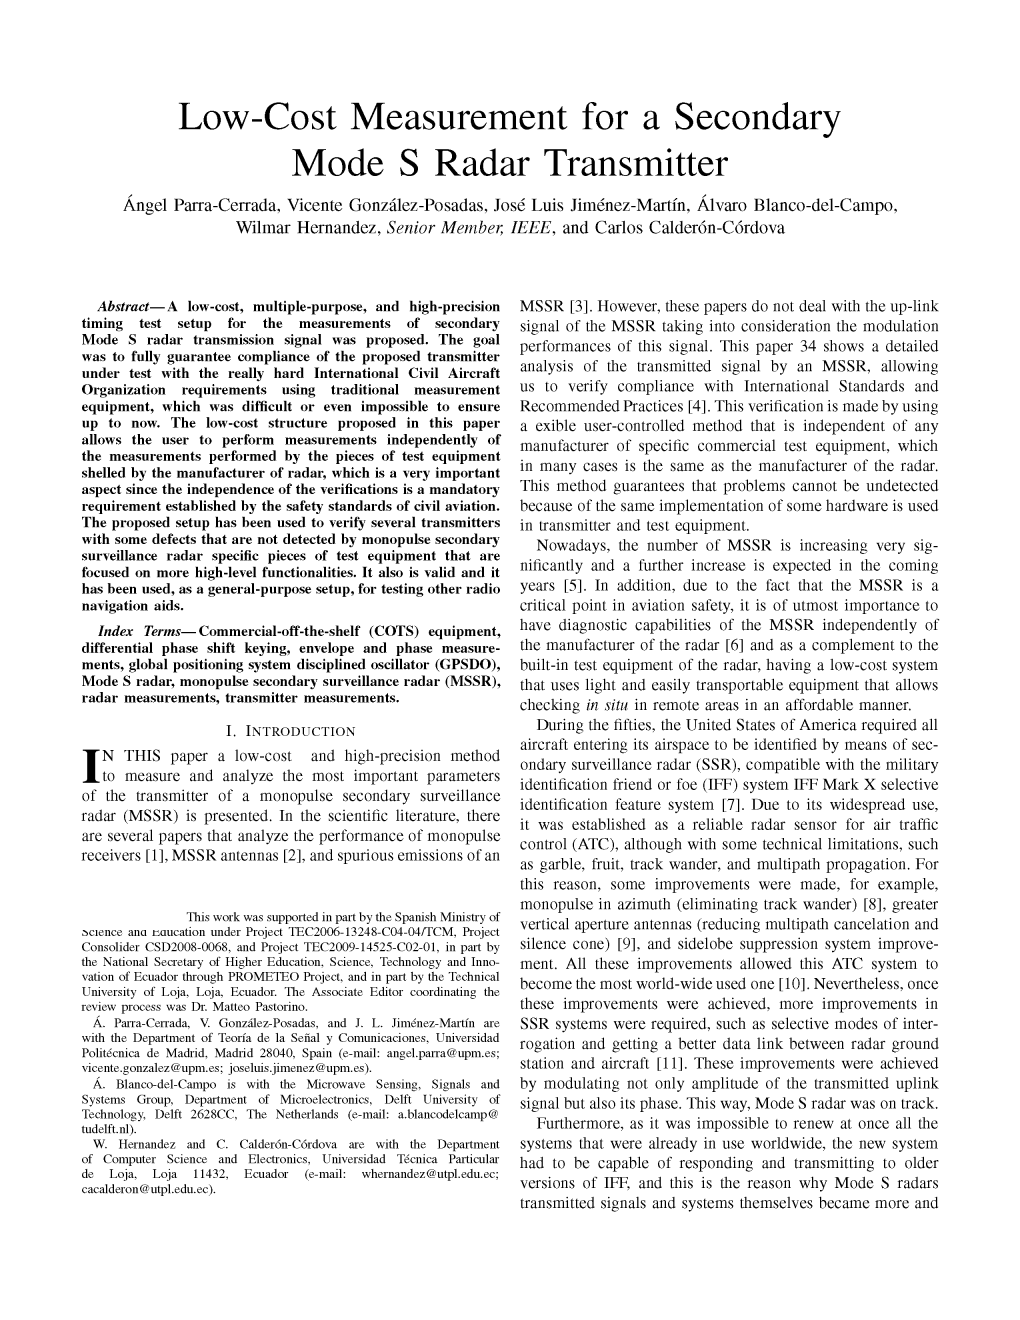 Low-Cost Measurement for a Secondary Mode S Radar Transmitter